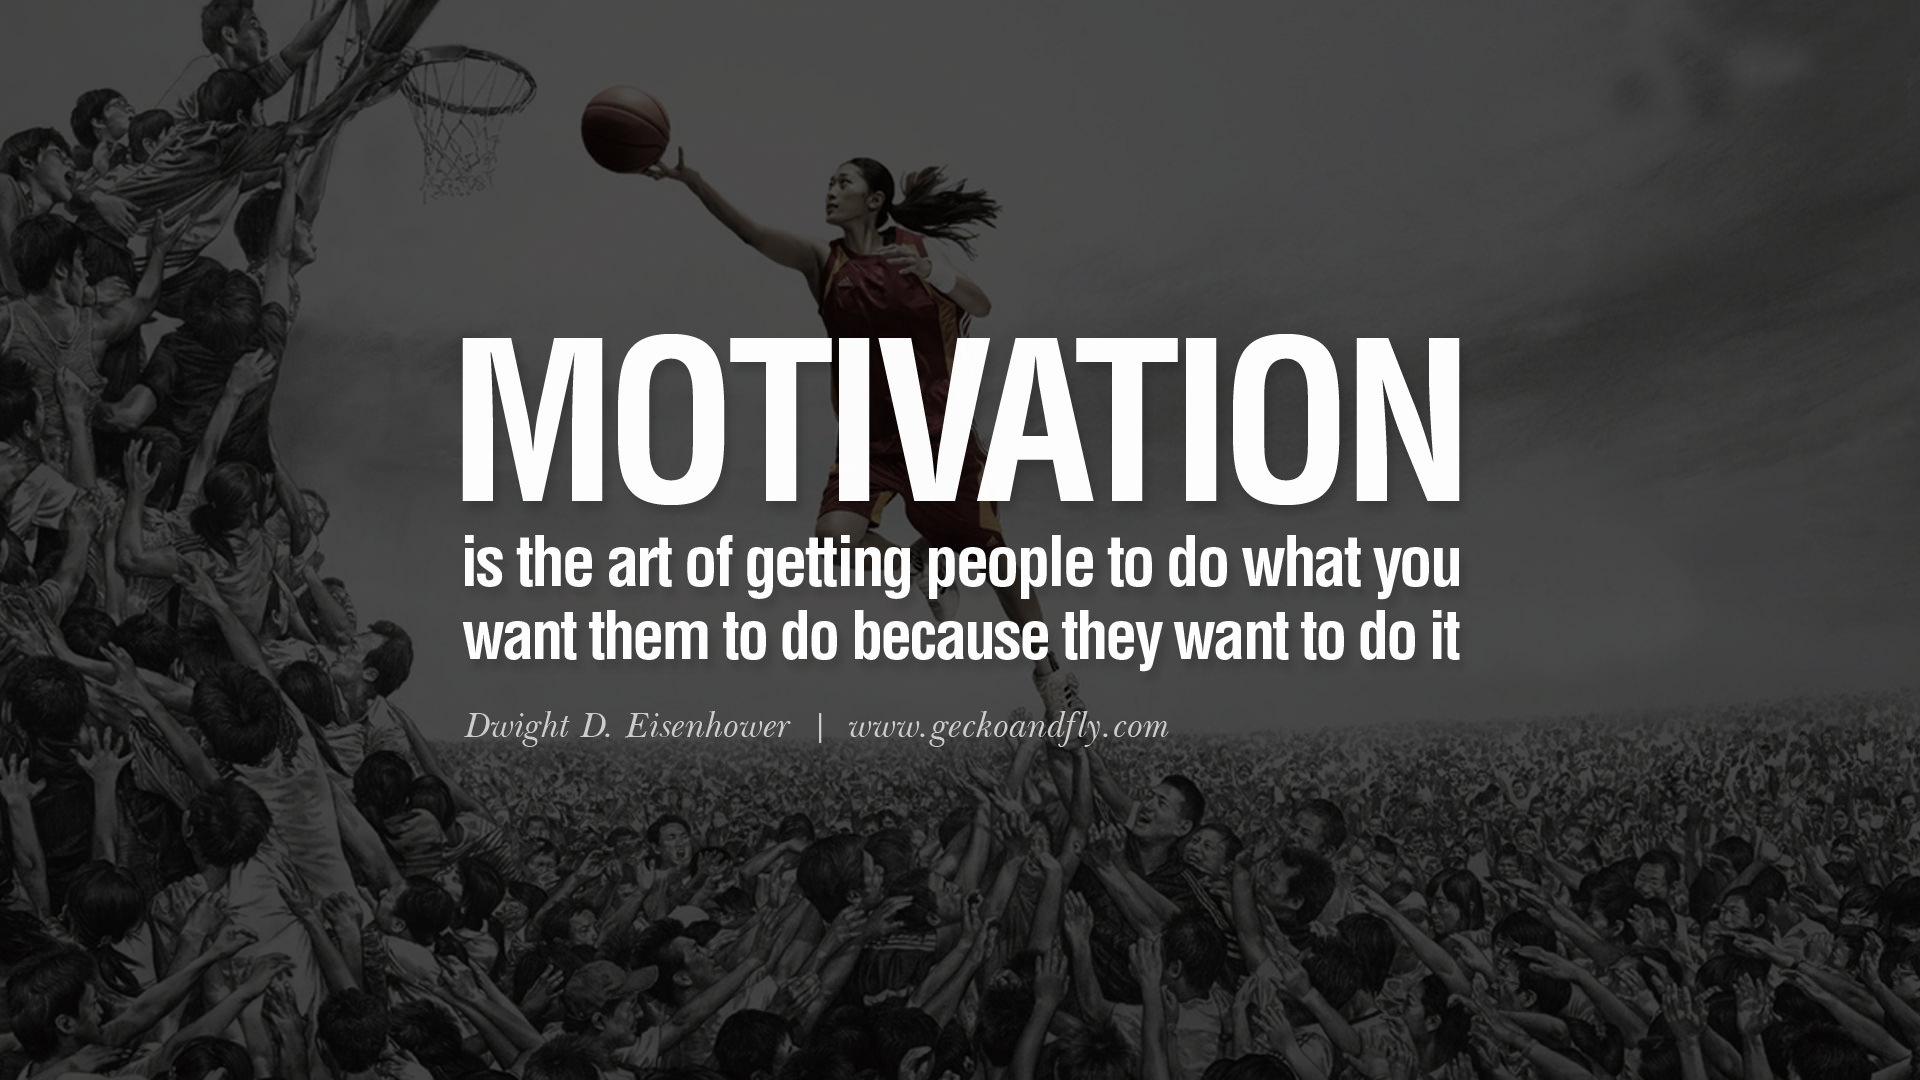 20 Encouraging and Motivational Poster Quotes on Sports and Life